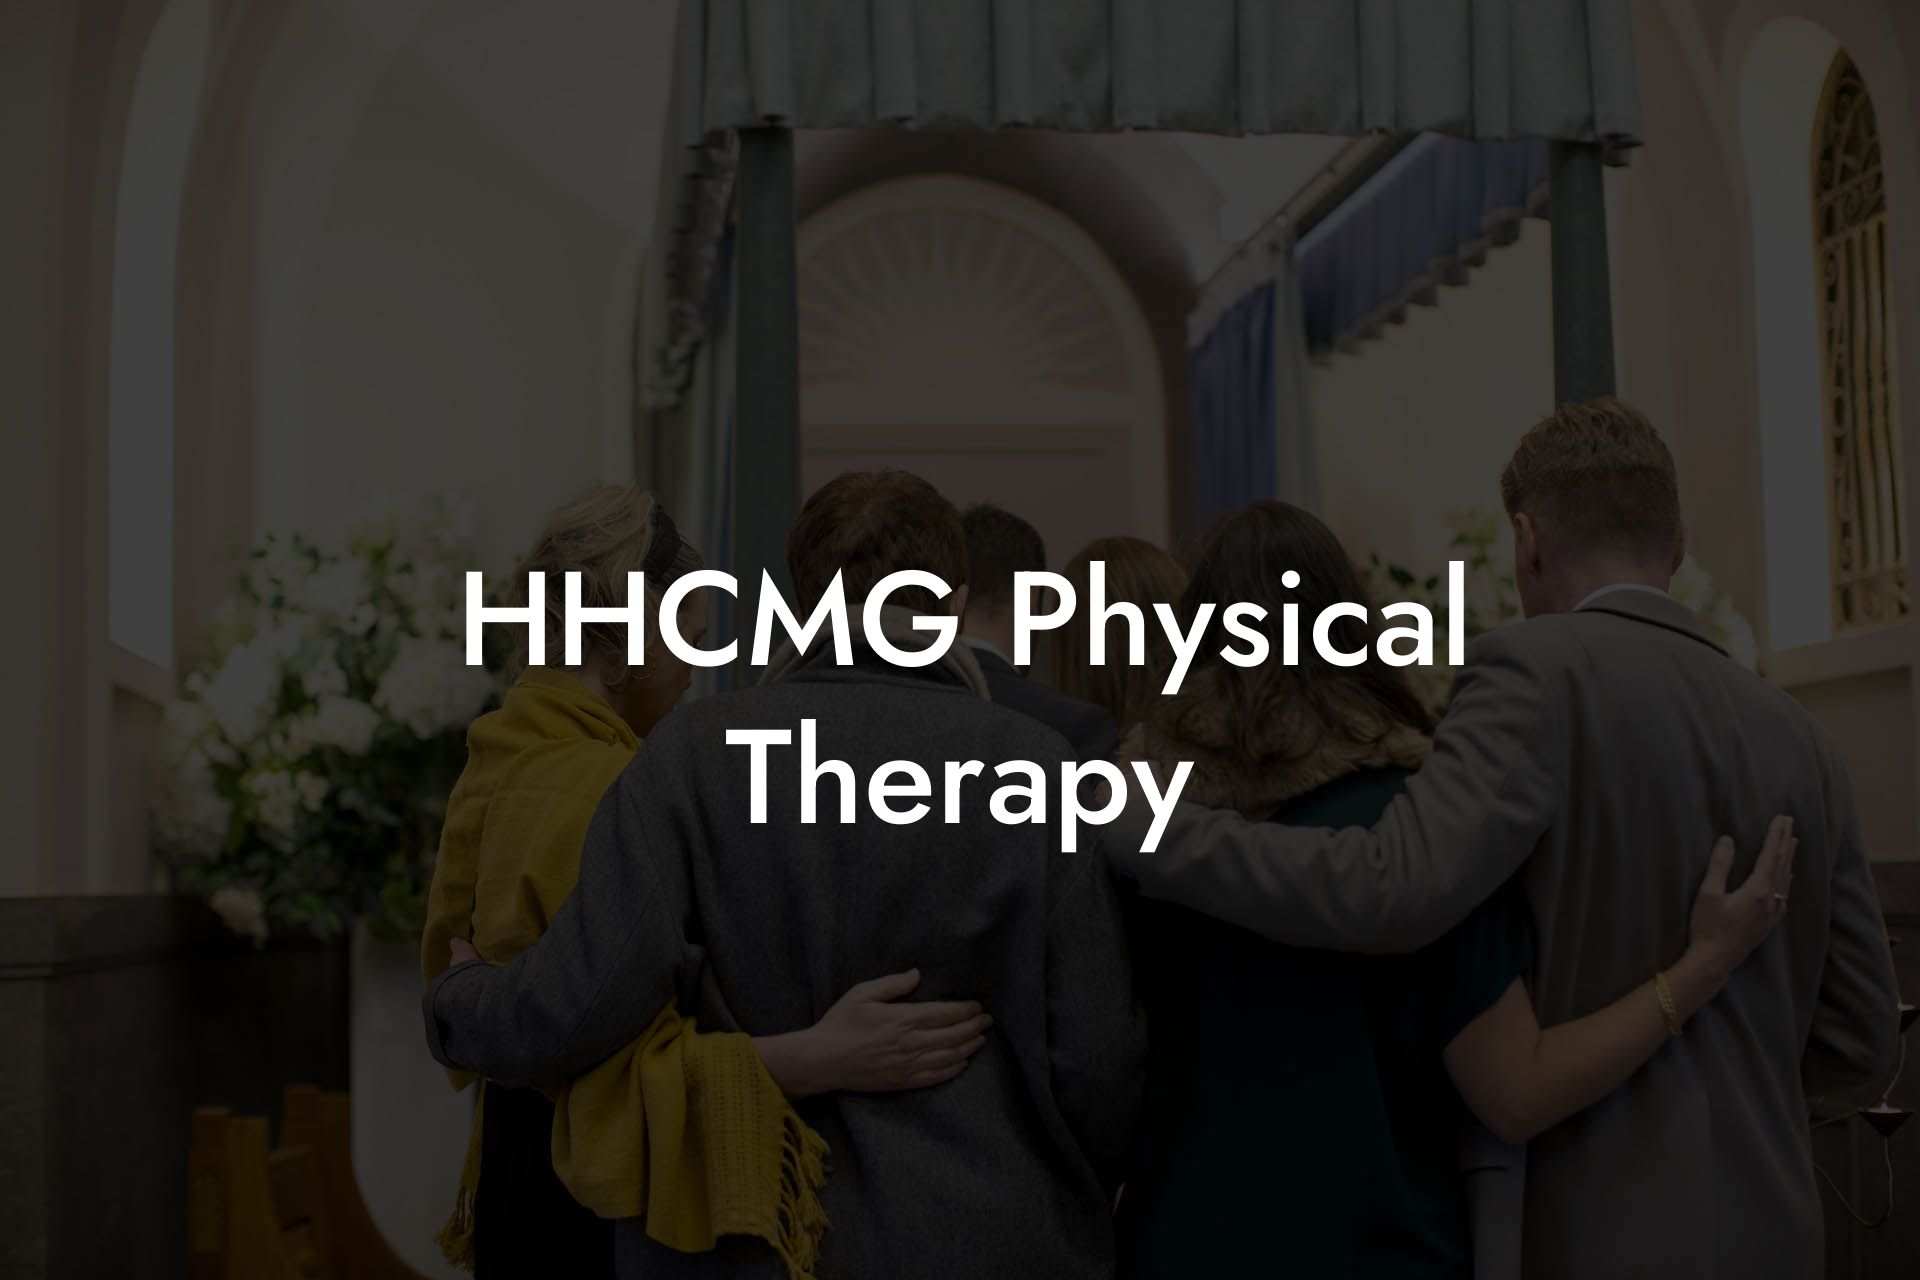 HHCMG Physical Therapy